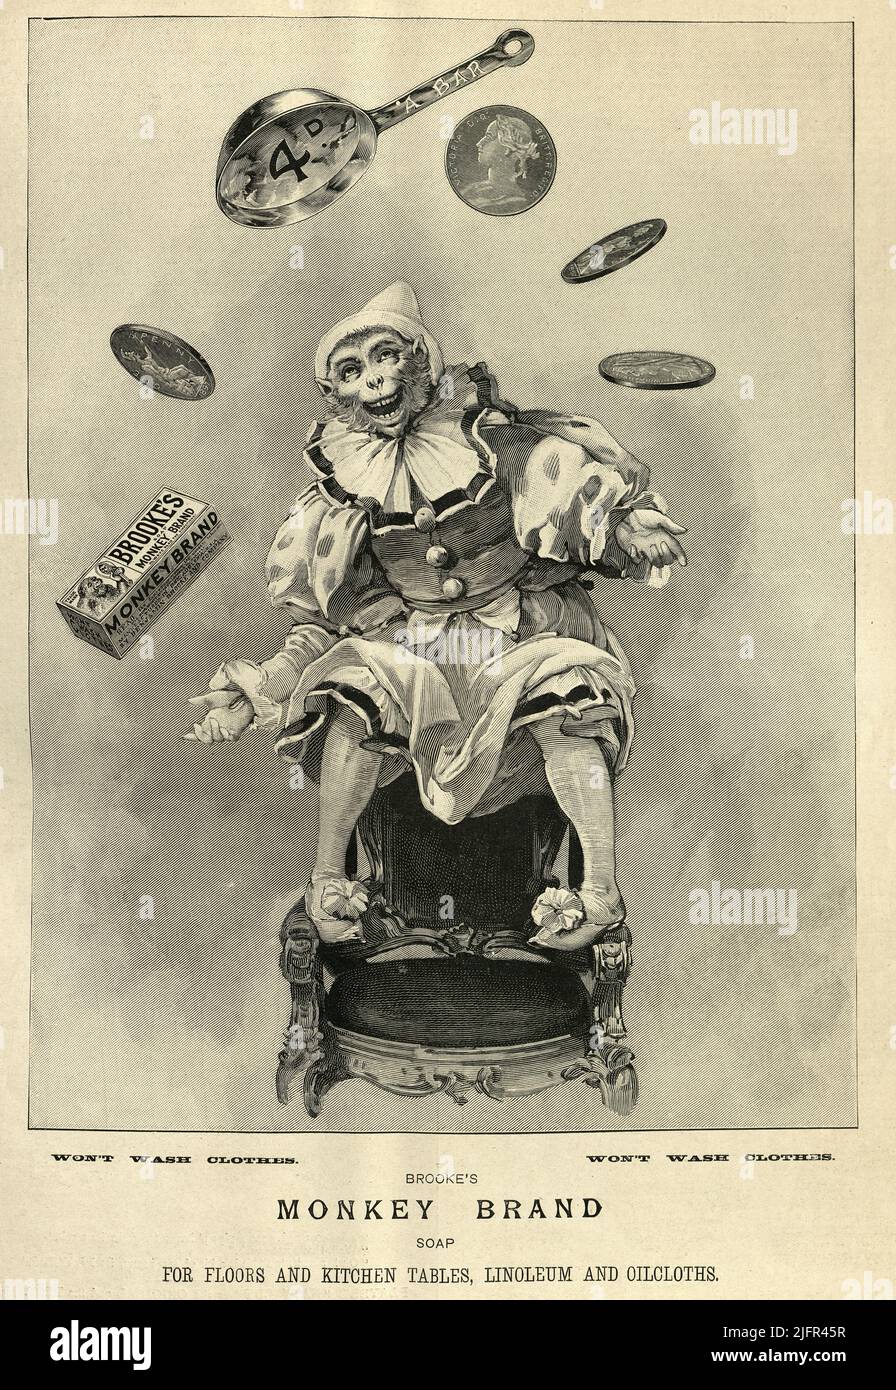 Victorian advert for Monkey Brand soap, monkey dressed as a clown, juggling, 1890s 19th Century Stock Photo